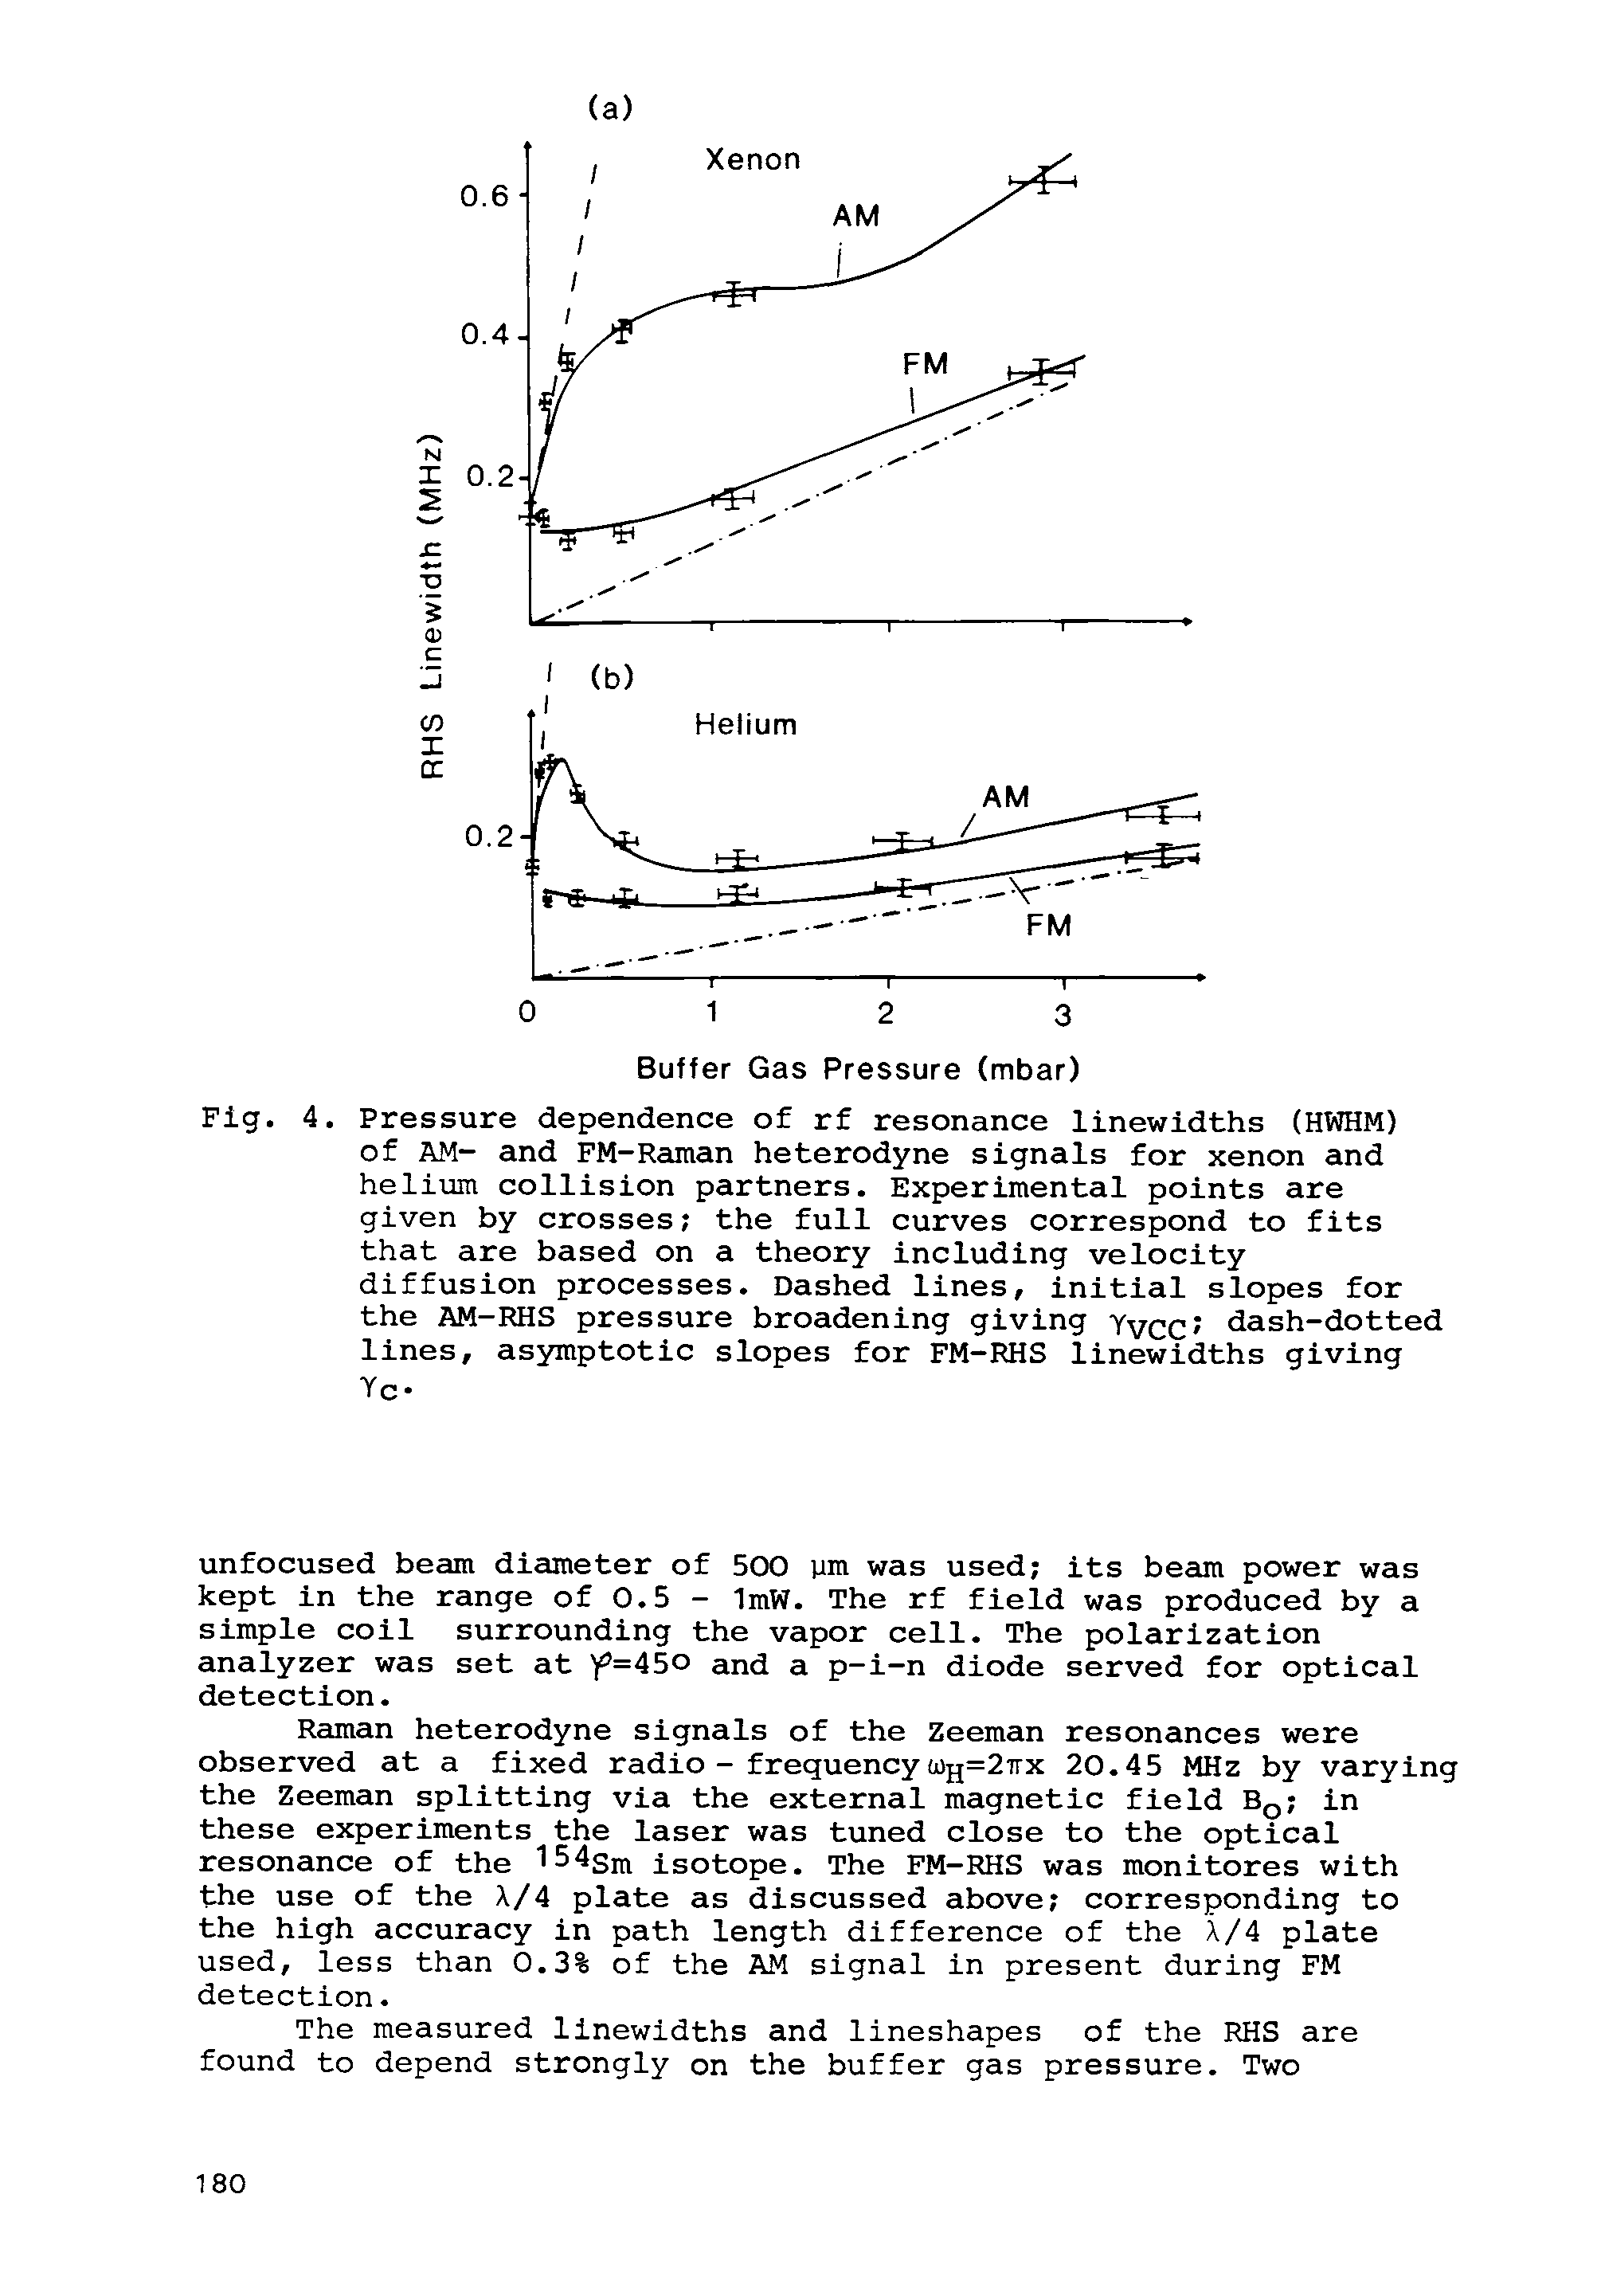 Fig. 4. Pressure dependence of rf resonance linewidths (HWHM) of AM- and FM-Raman heterodyne signals for xenon and helium collision partners. Experimental points are given by crosses the full curves correspond to fits that are based on a theory including velocity diffusion processes. Dashed lines, initial slopes for the AM-RHS pressure broadening giving YvcC dash-dotted lines, asymptotic slopes for FM-RHS linewidths giving Yc-...